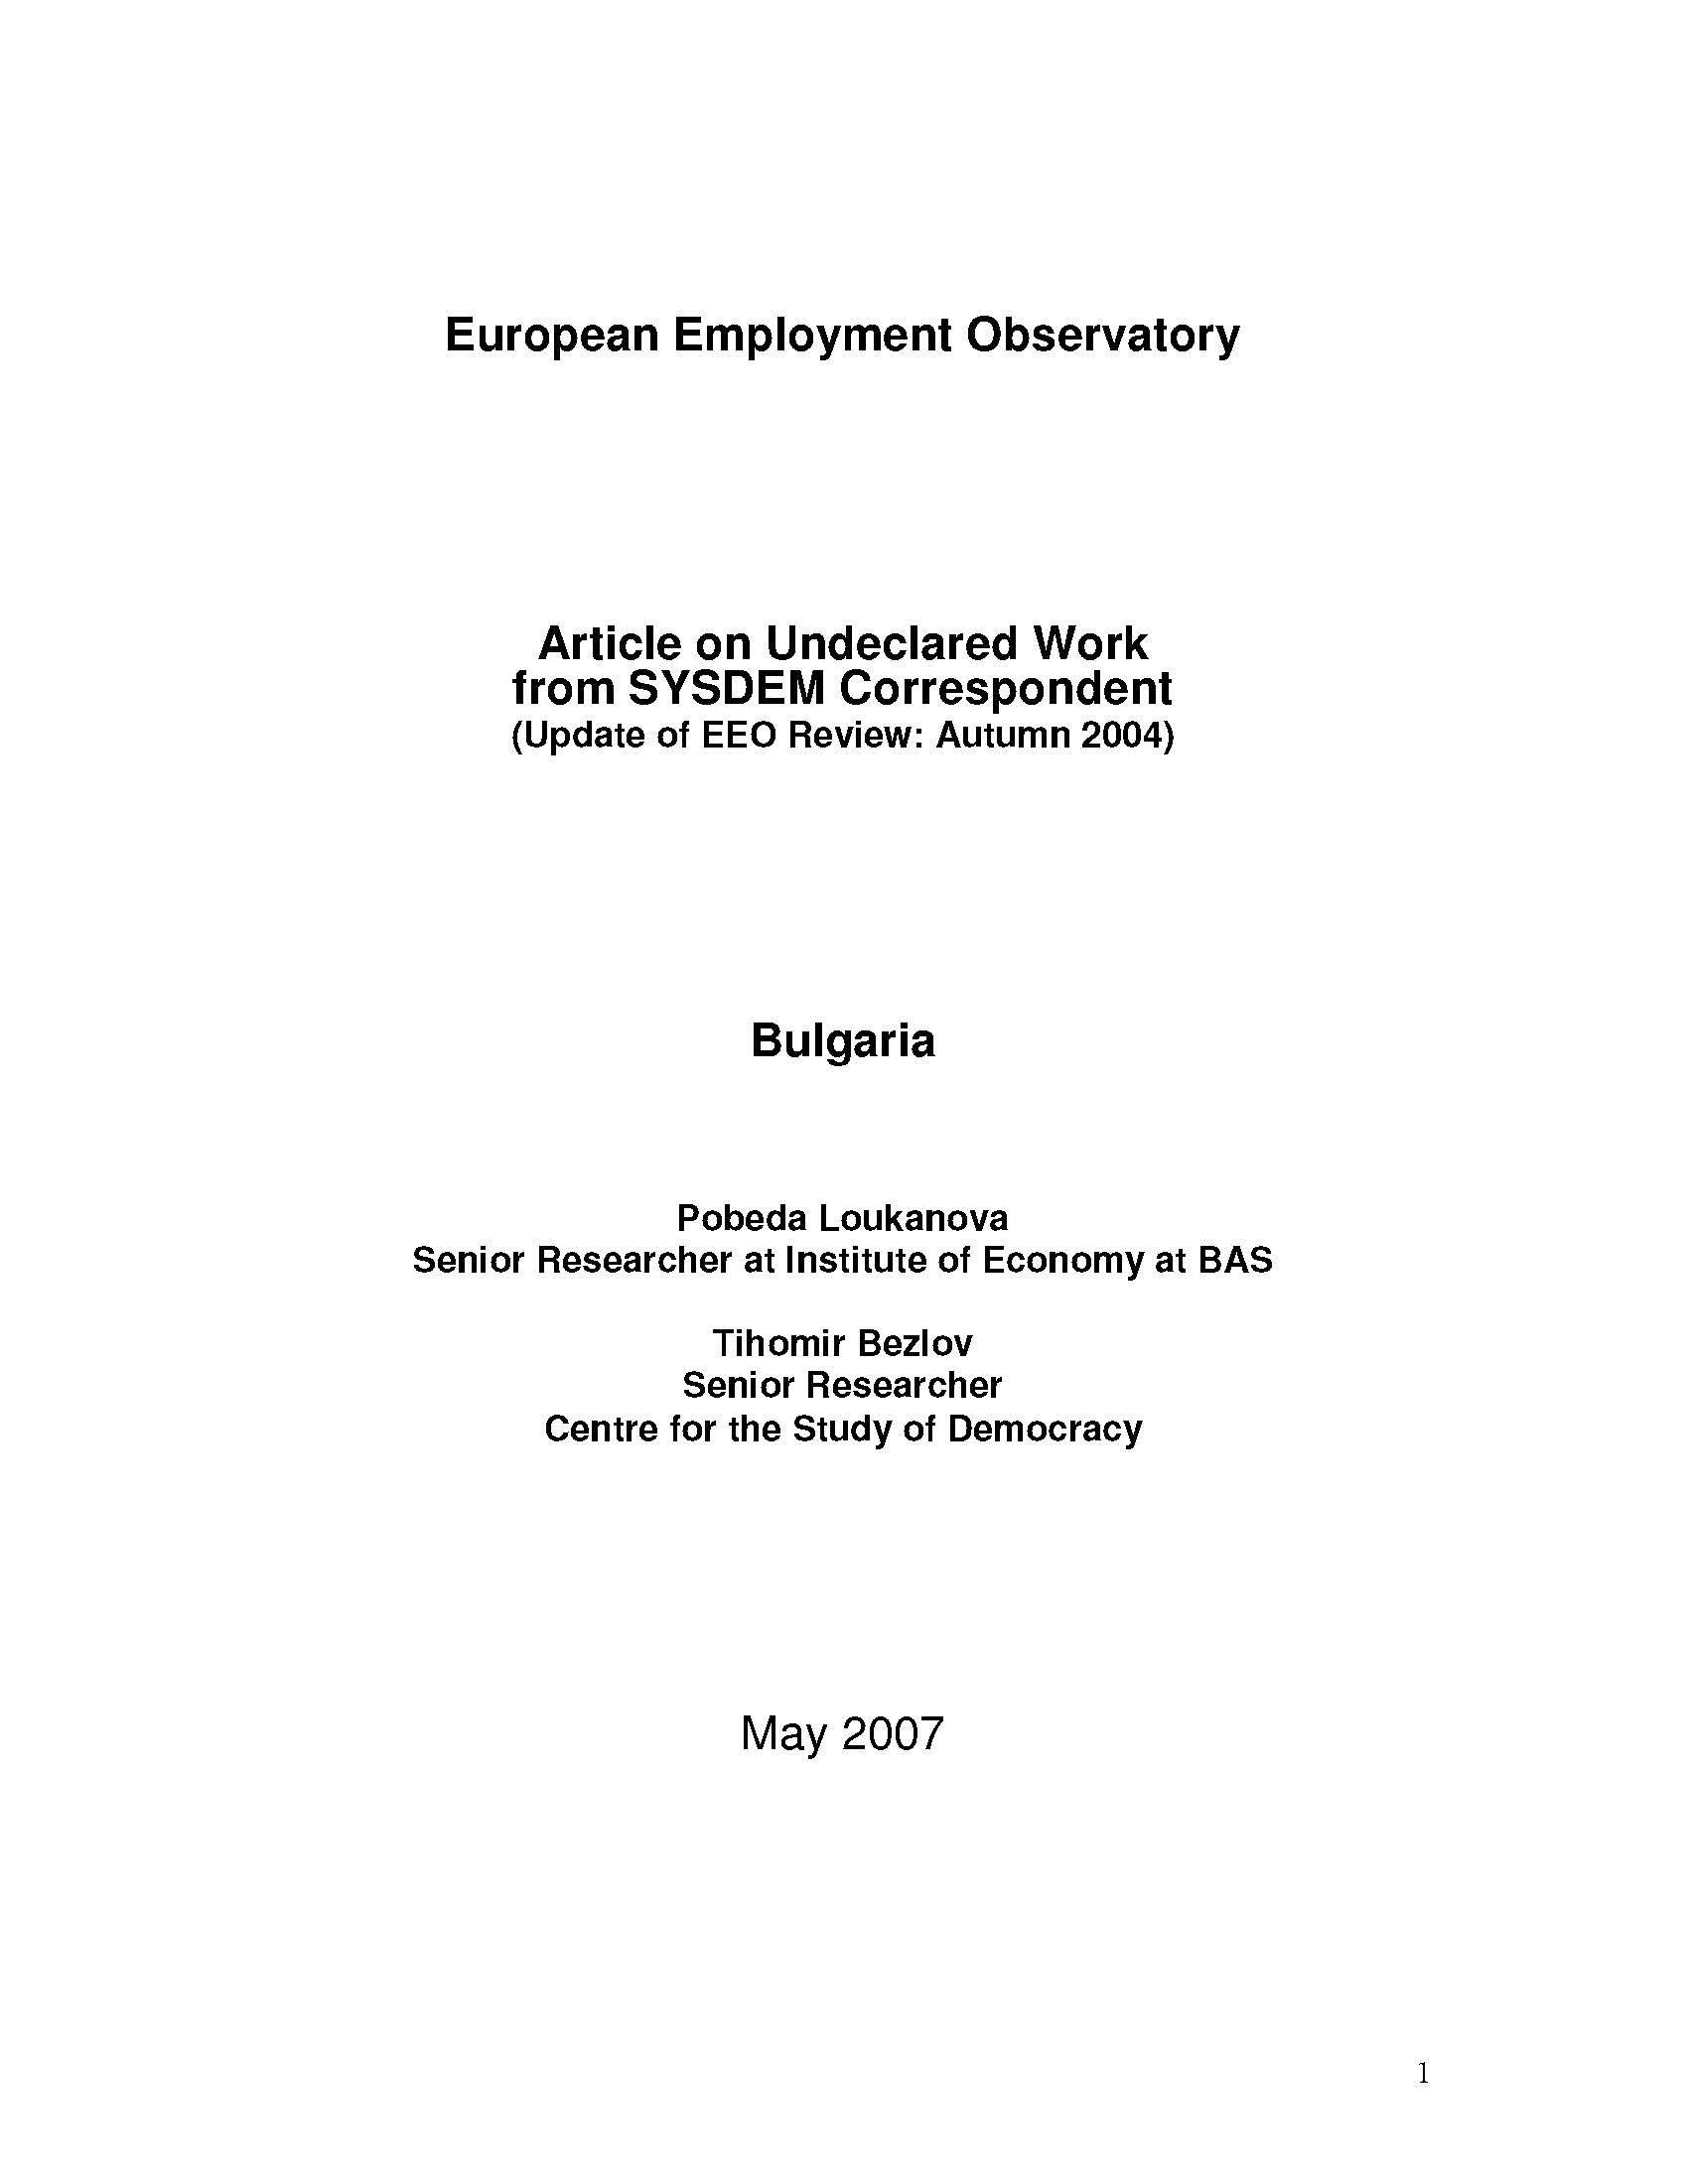 Article on Undeclared Work from SYSDEM Correspondent: Bulgaria